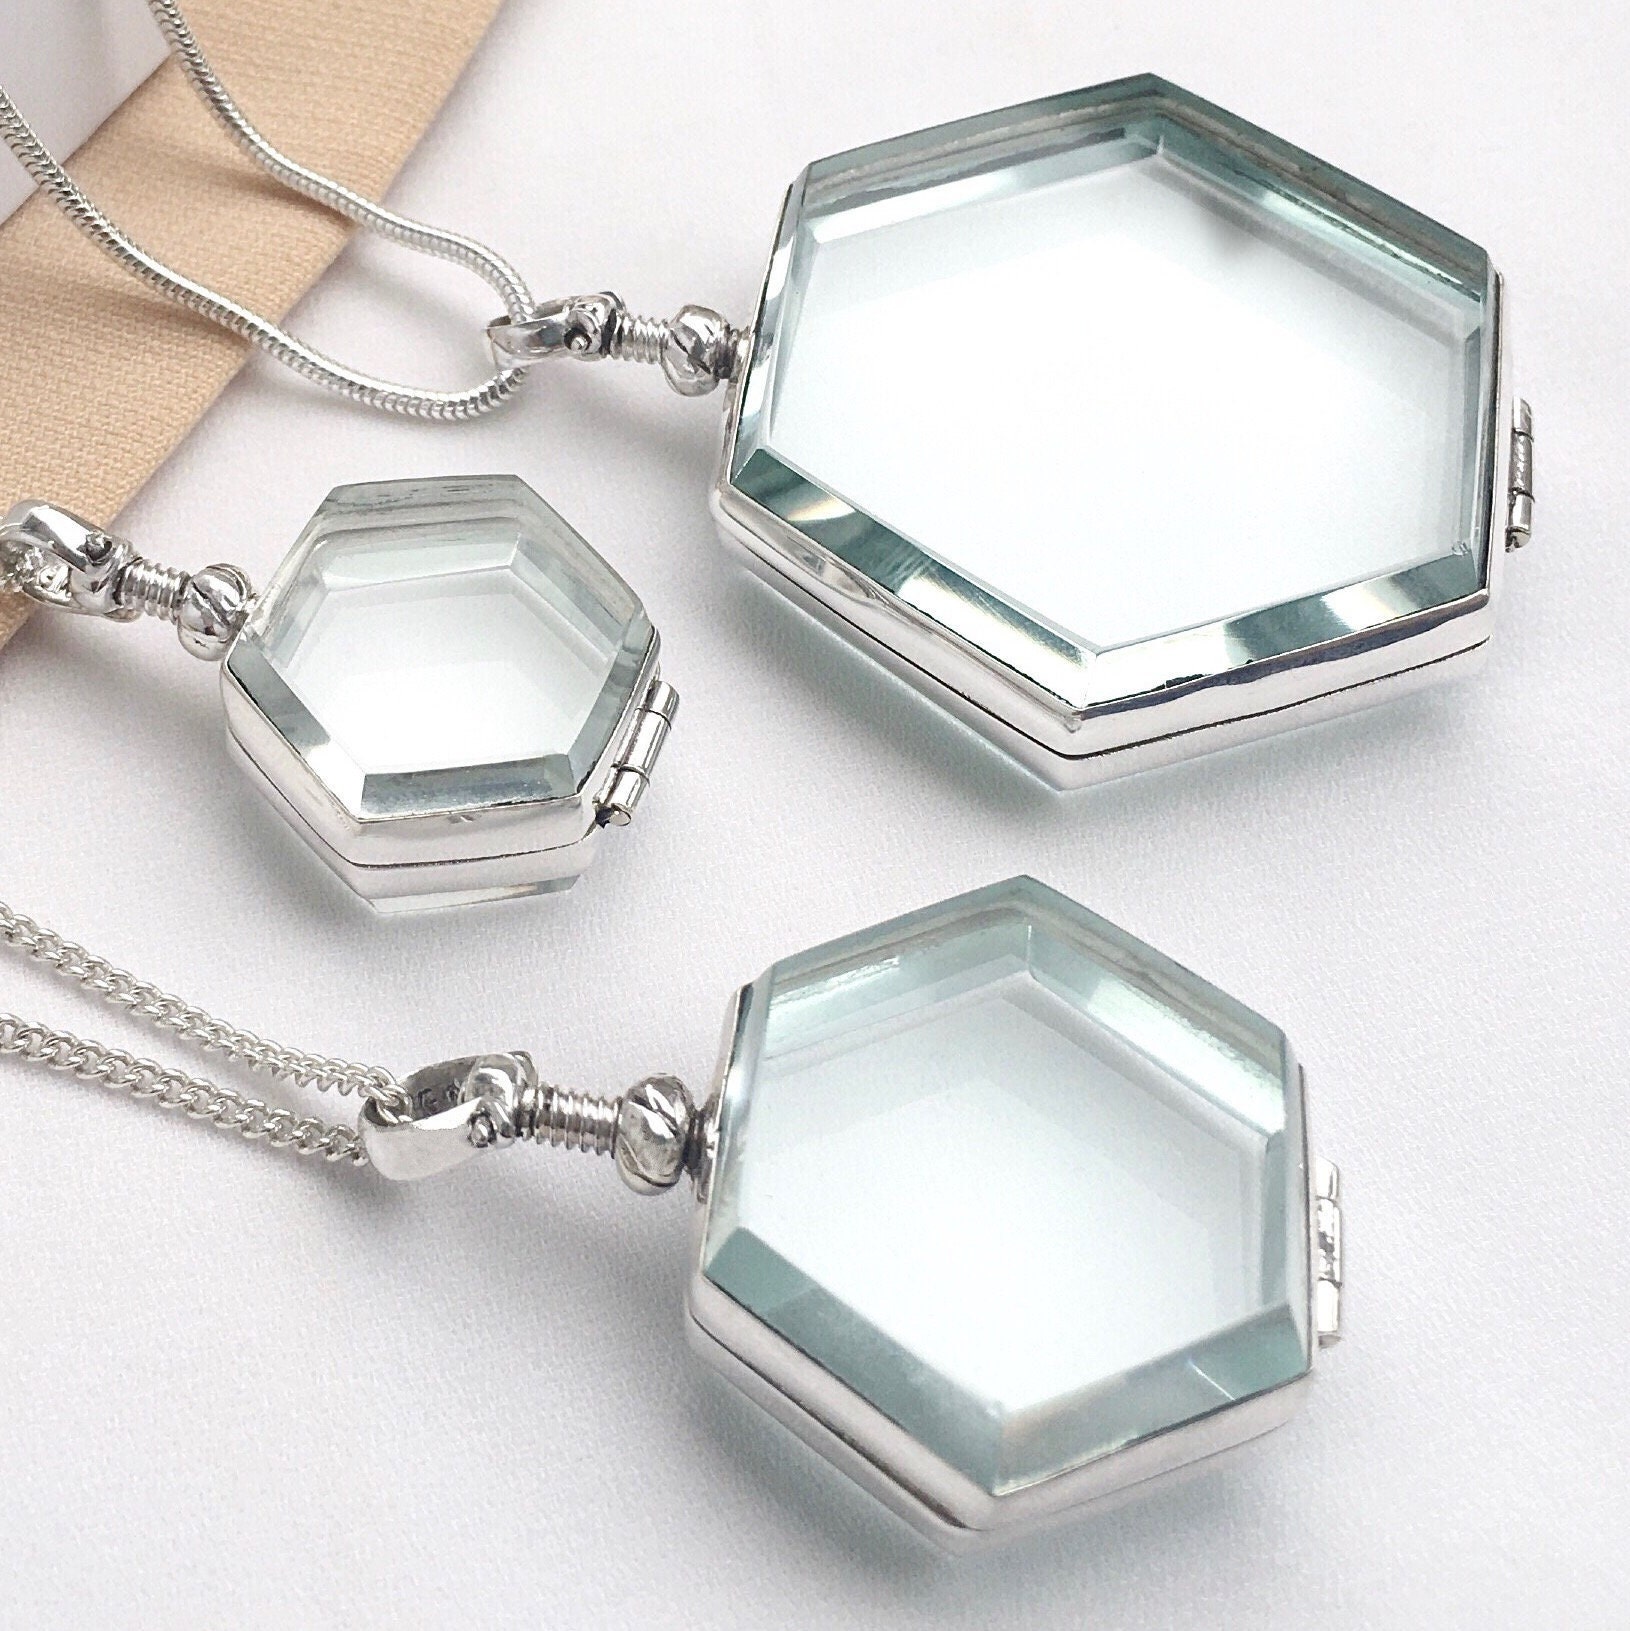 Floating Memory Glass Locket Pendant Necklace With Bead Chains DIY Jewelry  For Women In Magnetic Charm 2021 From Toponewholesaler, $1.08 | DHgate.Com